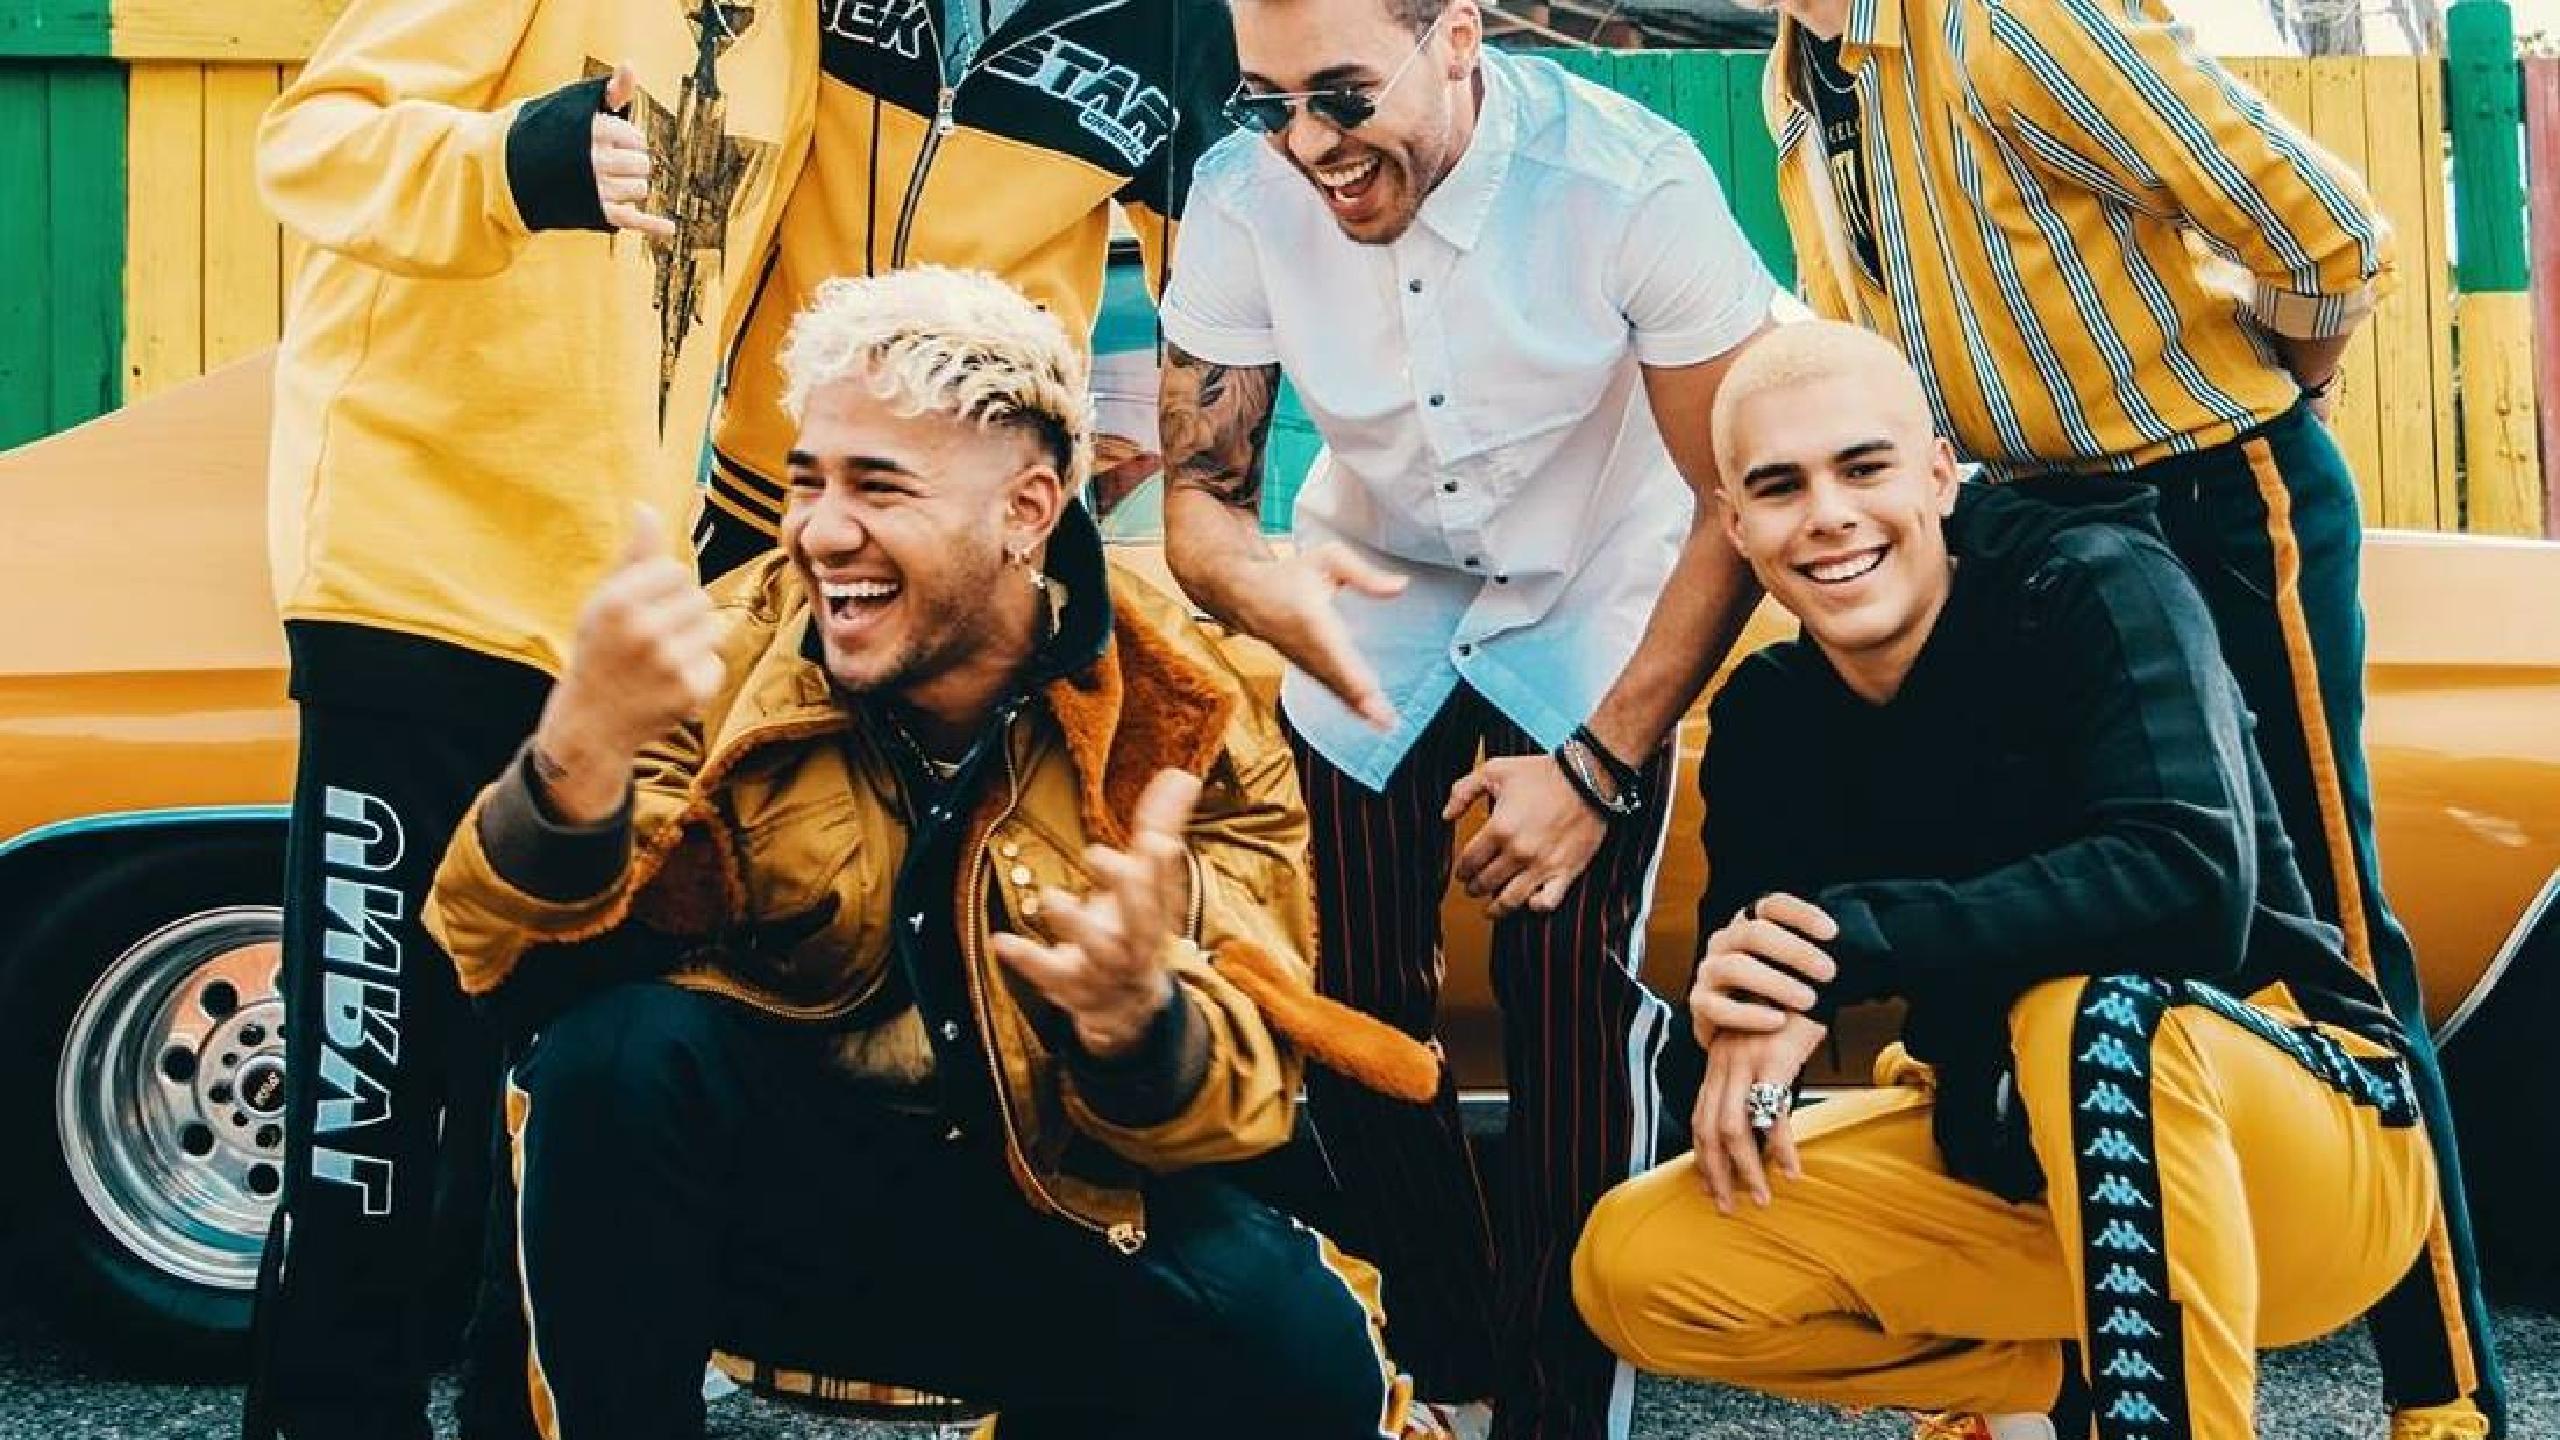 CNCO tour dates 2019 2020. CNCO tickets and concerts